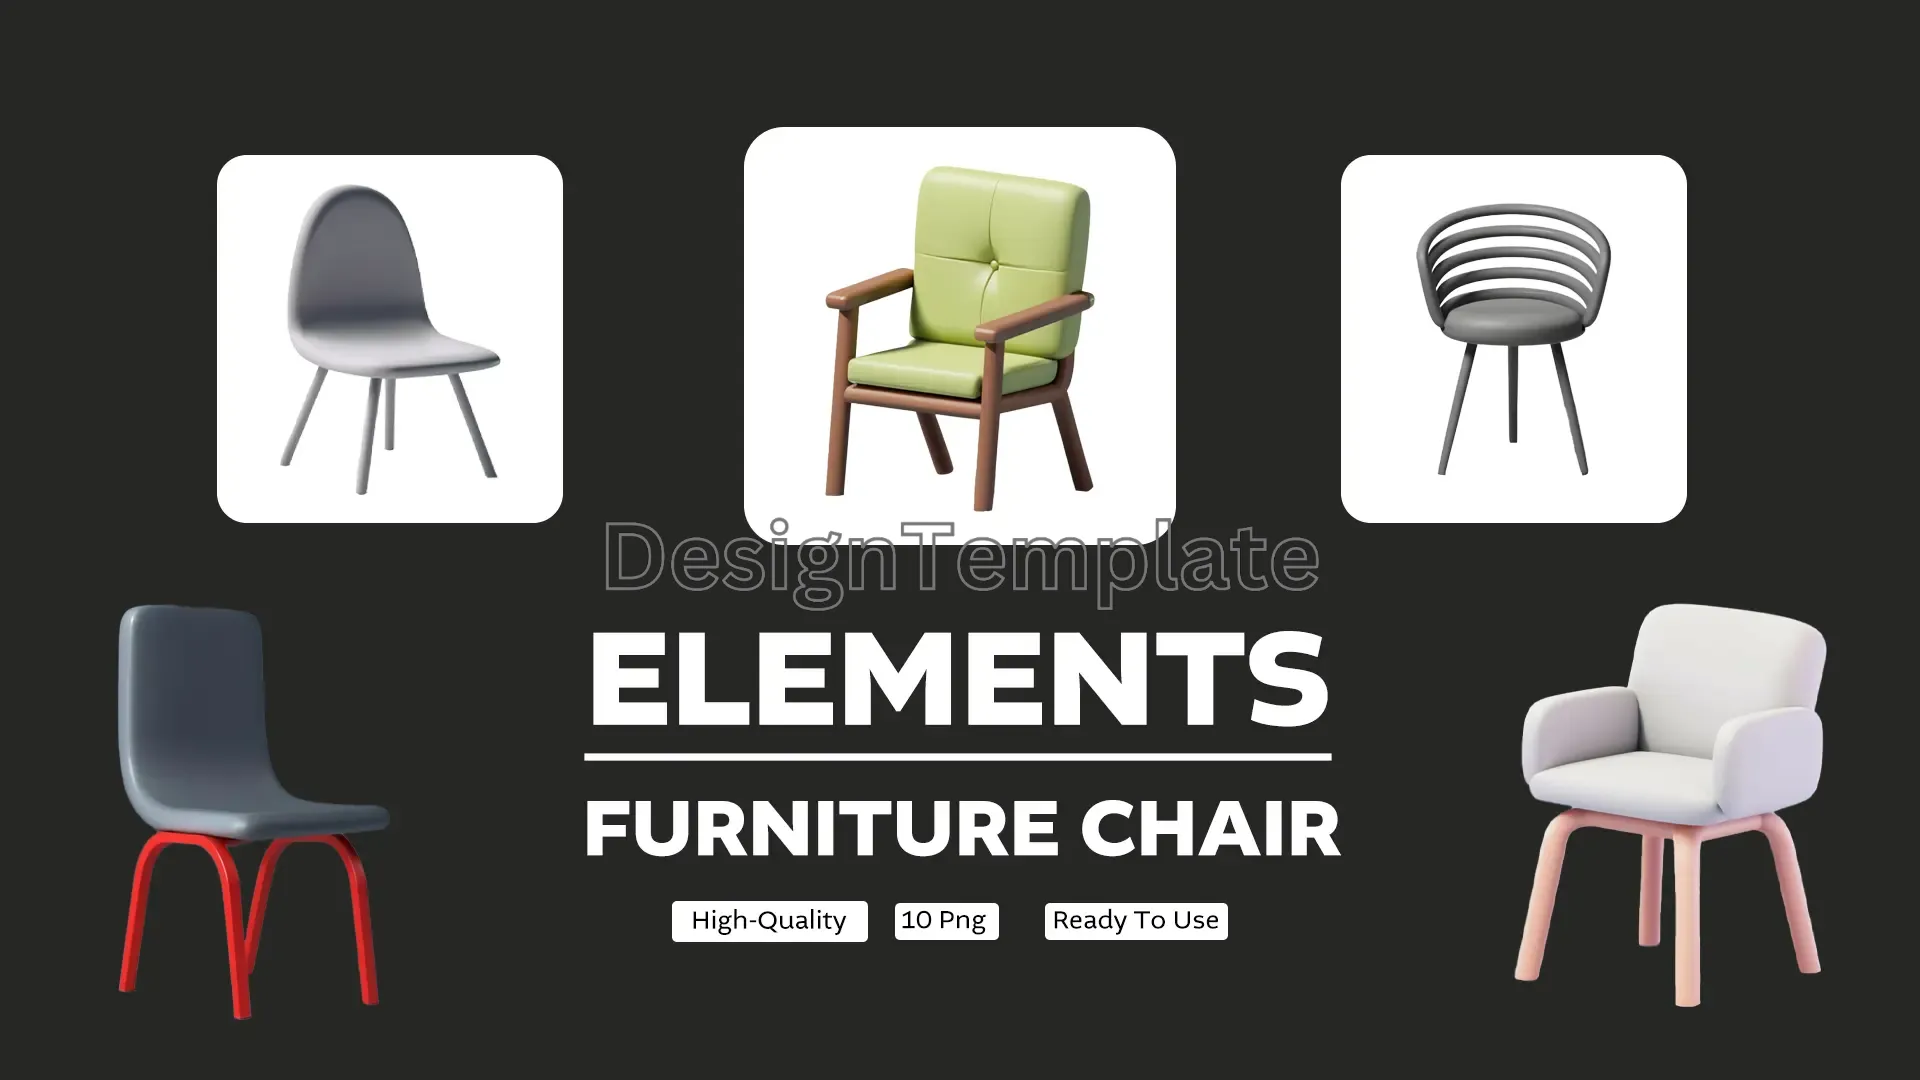 Chair Charms 3D Chair Graphics Pack